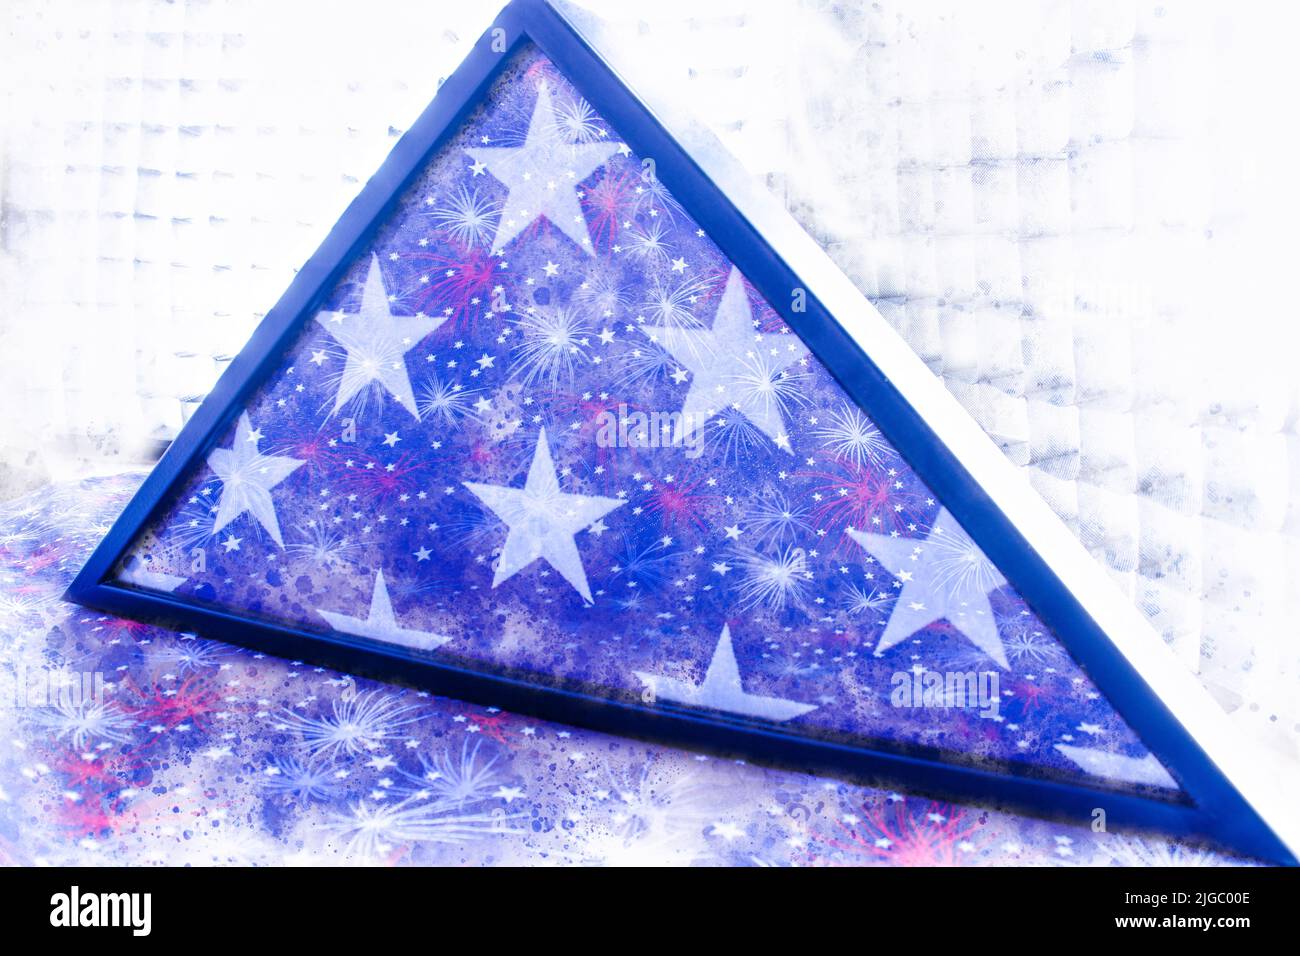 Patriotic American Veteran  military flag in case with fireworks reflecting on glass Stock Photo